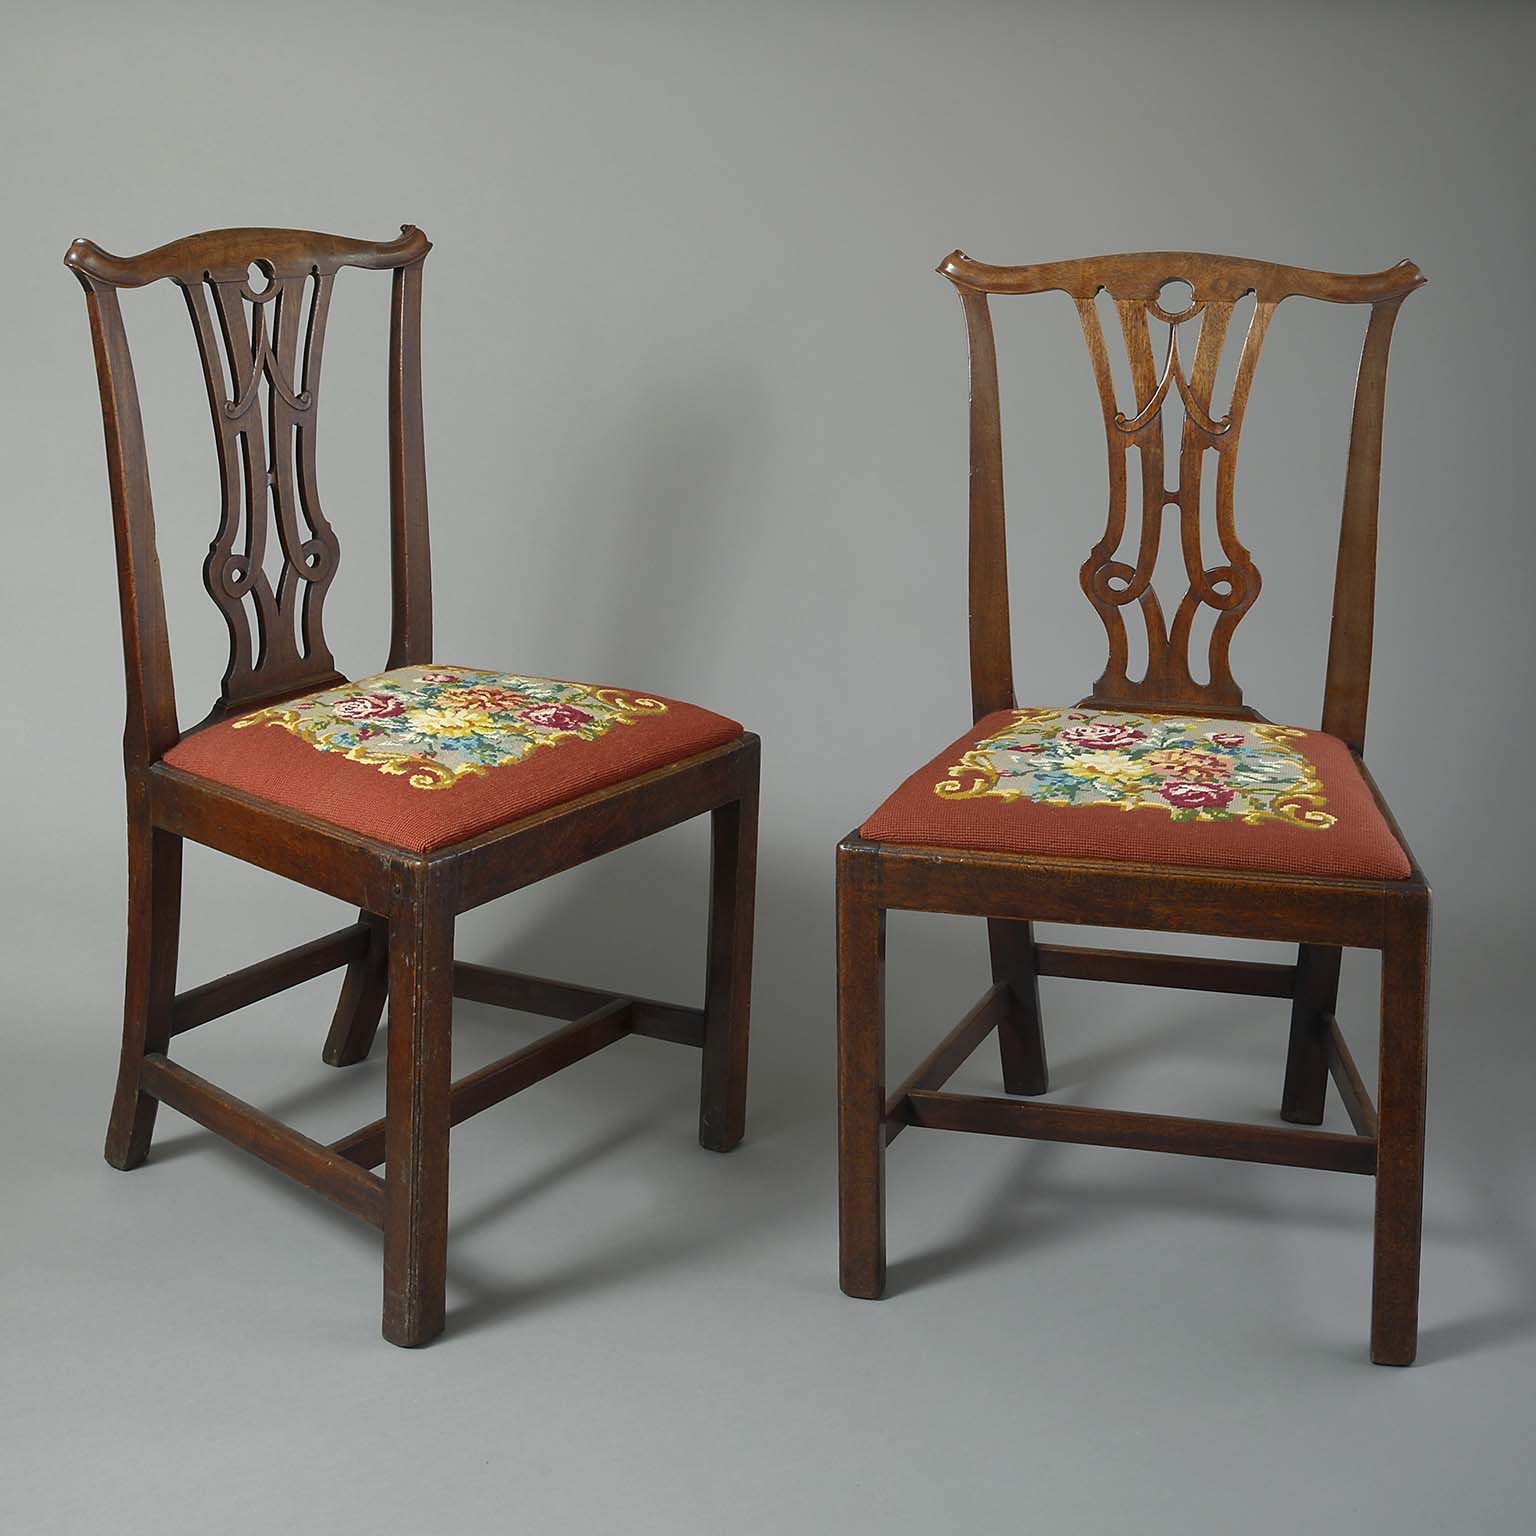 Pair of Chairs of the Chippendale Period